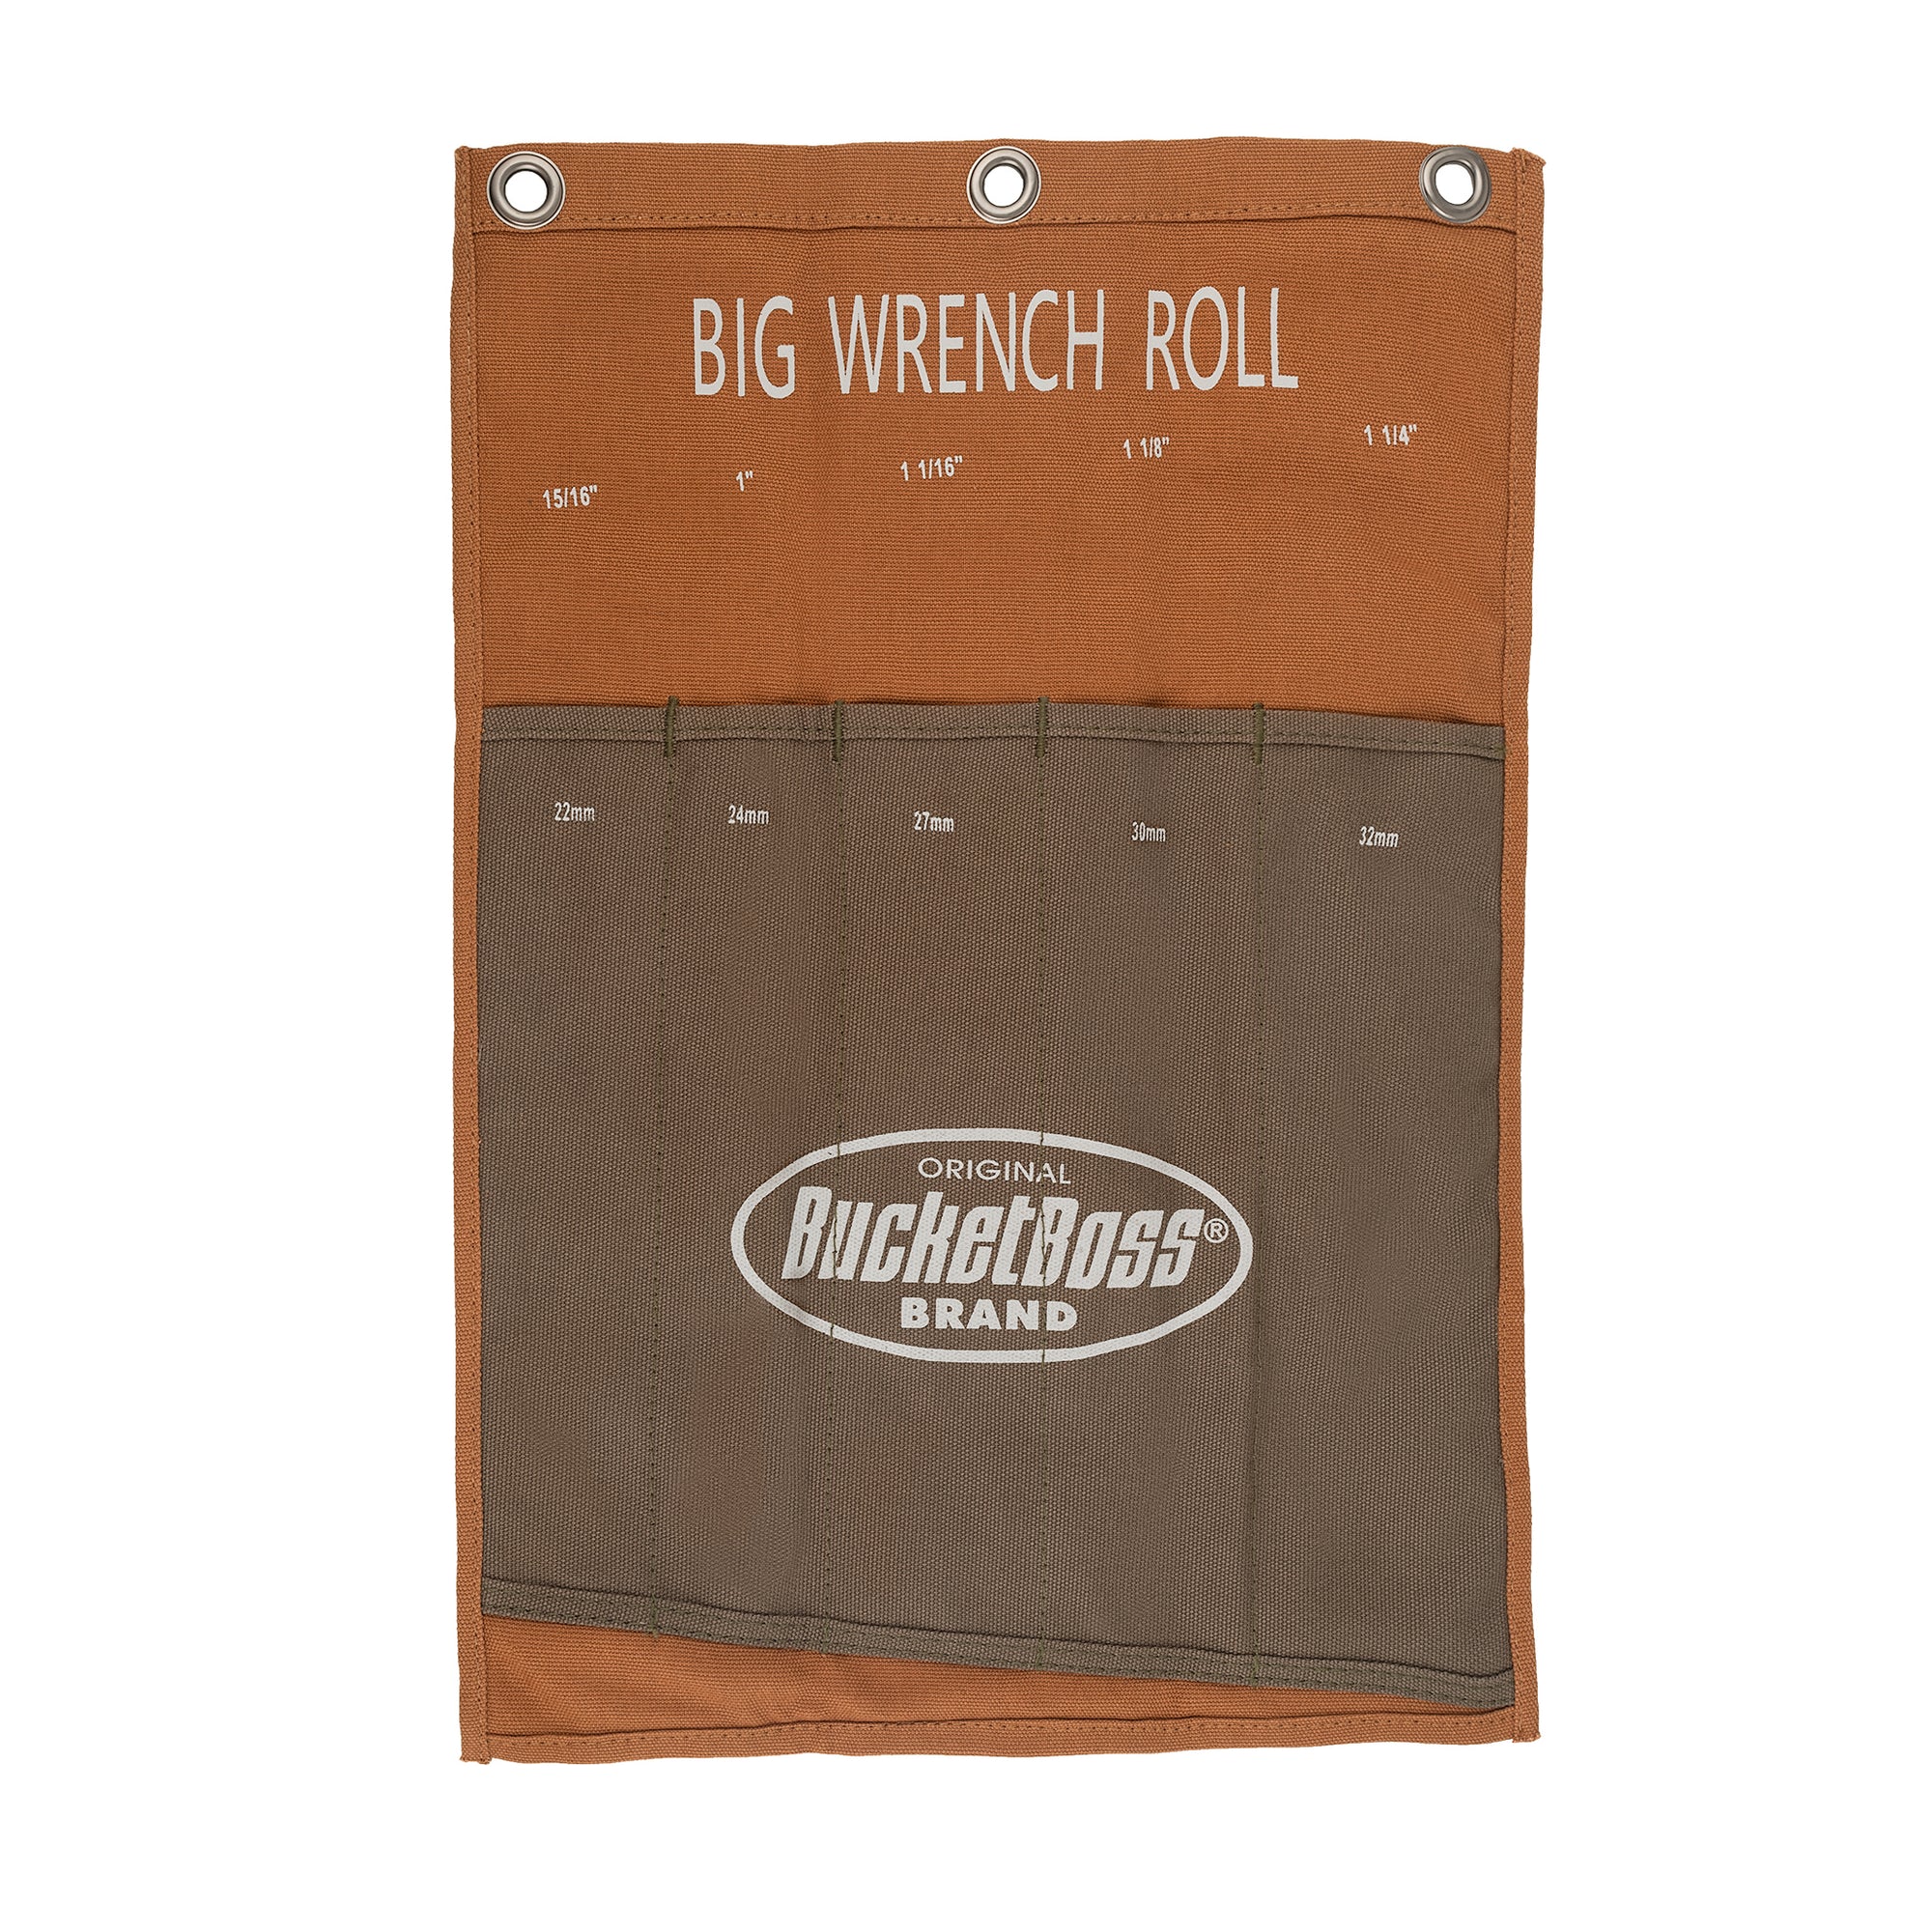 Big Wrench Roll